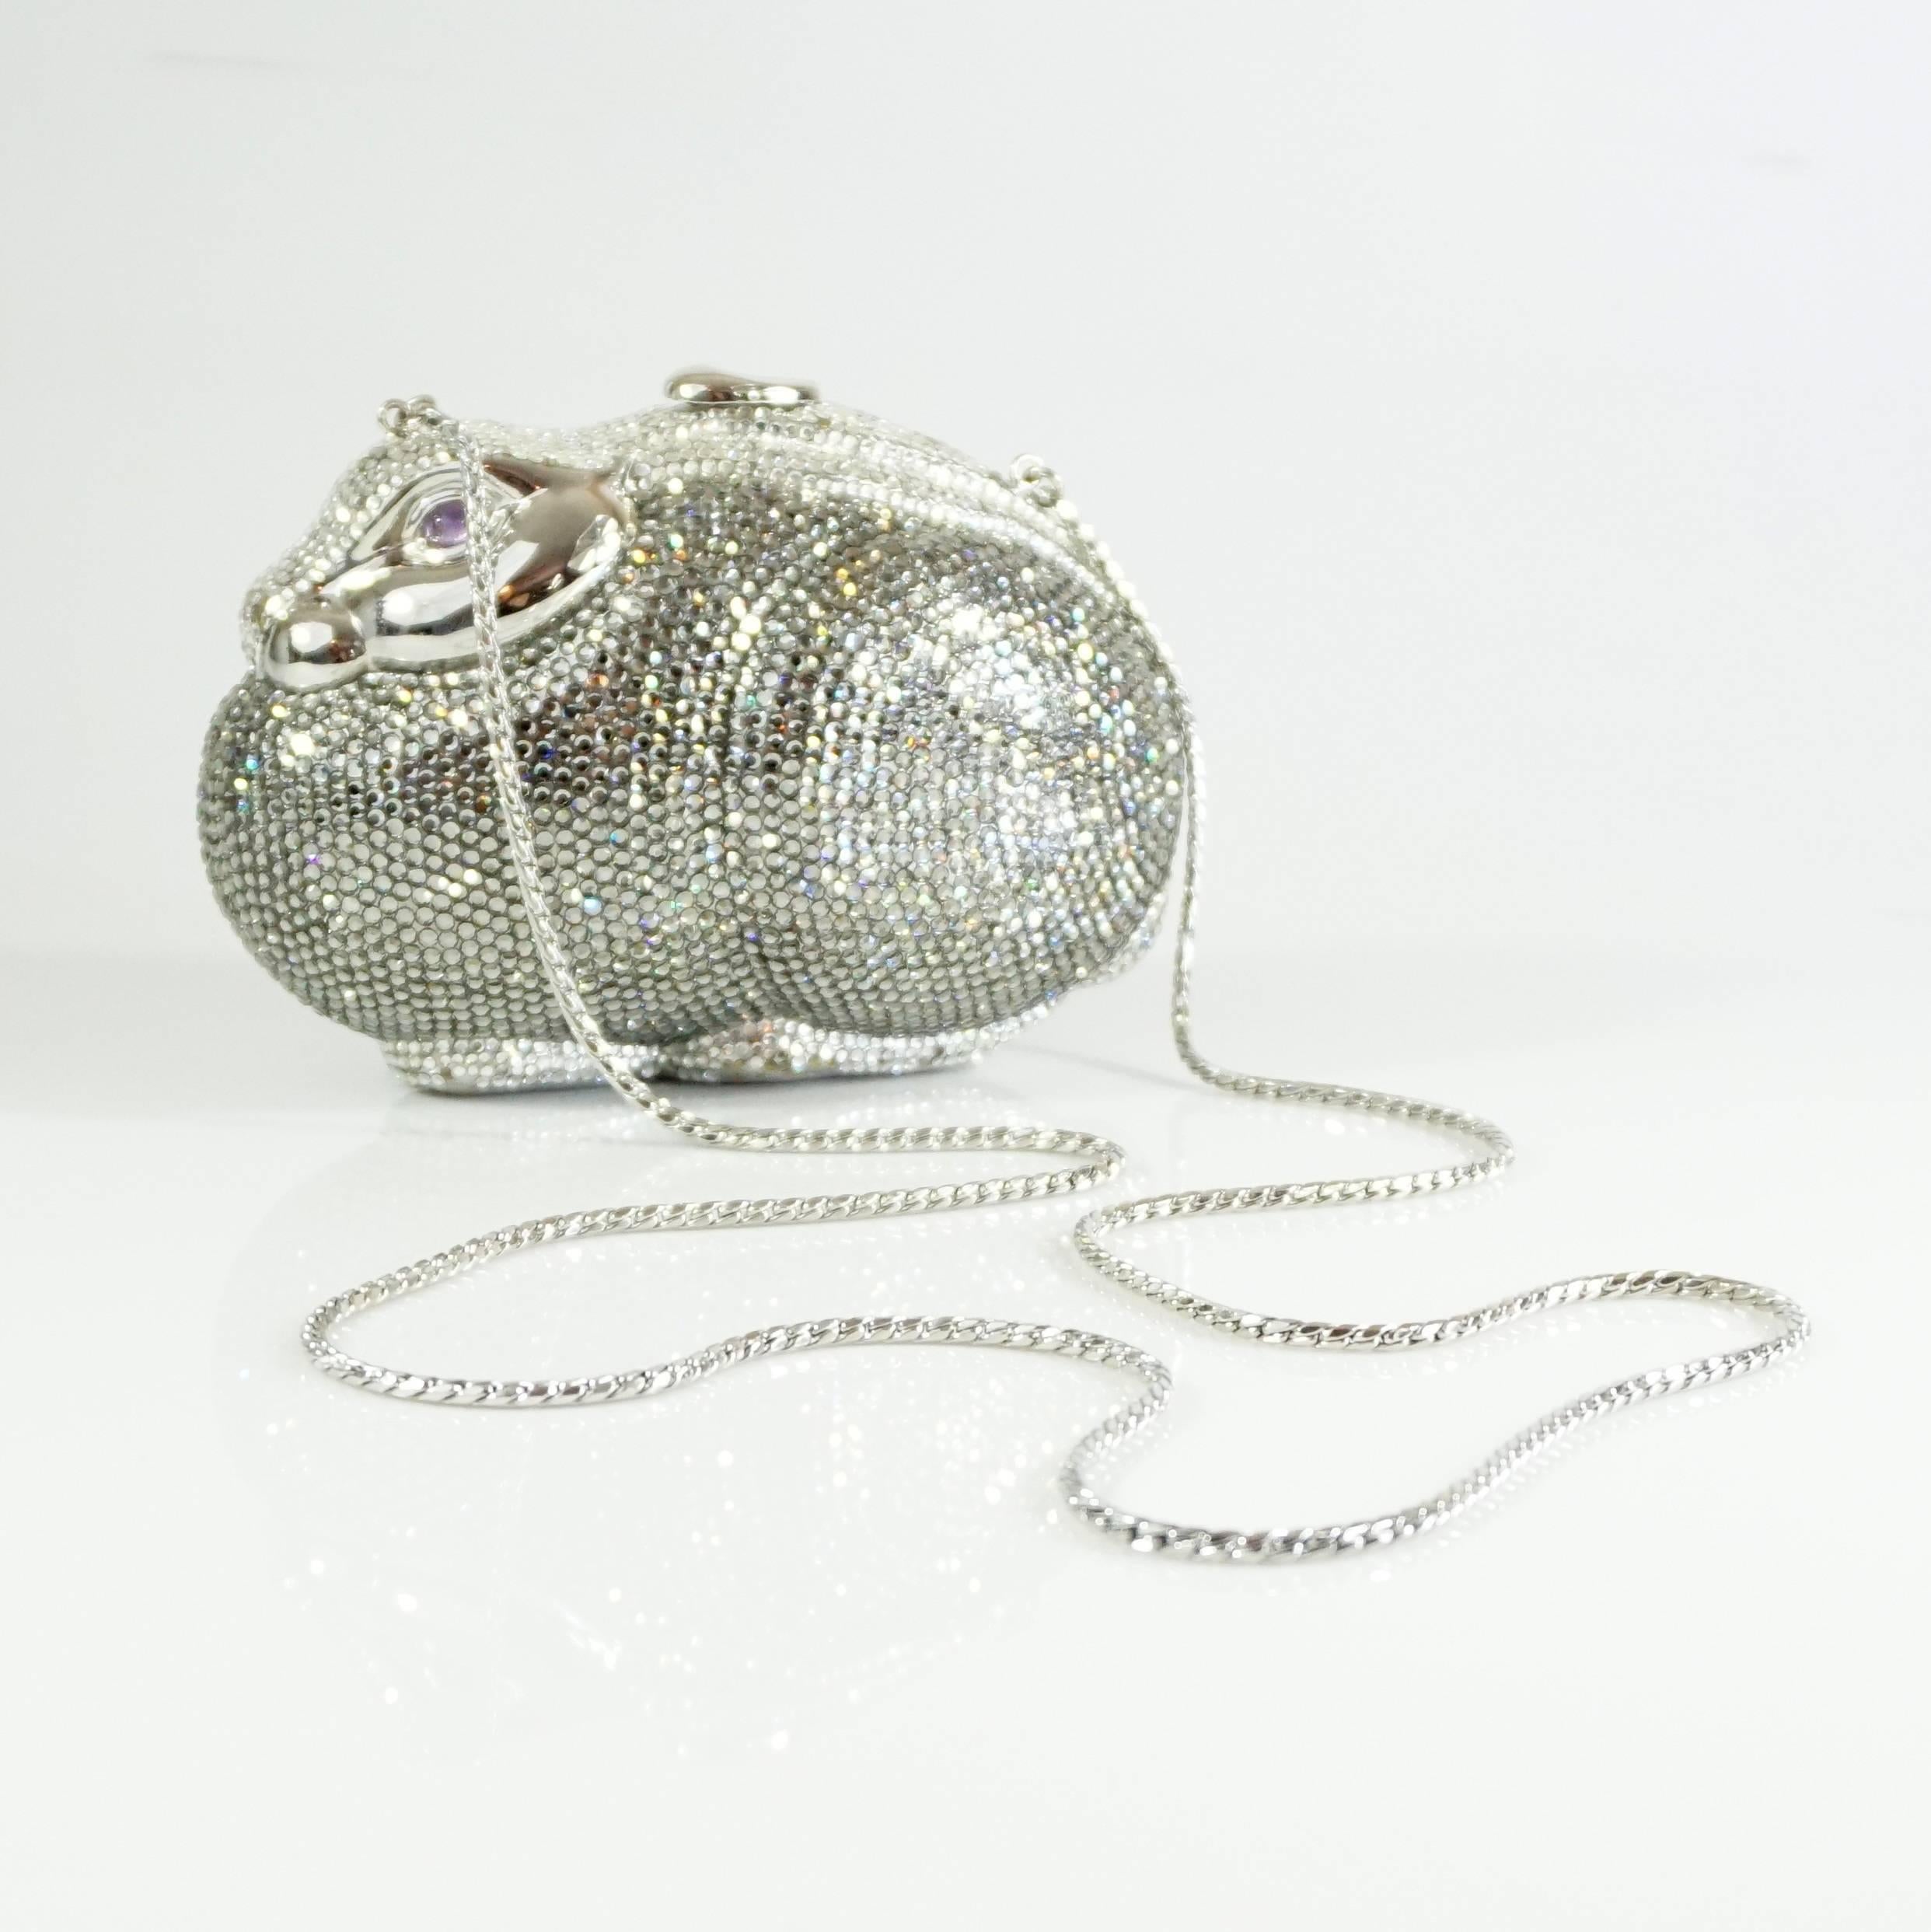 This Judith Leiber minaudiere has different tones of silver rhinestones with purple stone eyes on silver metal. It is in the shape of a bunny rabbit and has a longer crossbody strap which can be hidden. Purchase comes with a duster, comb, compact